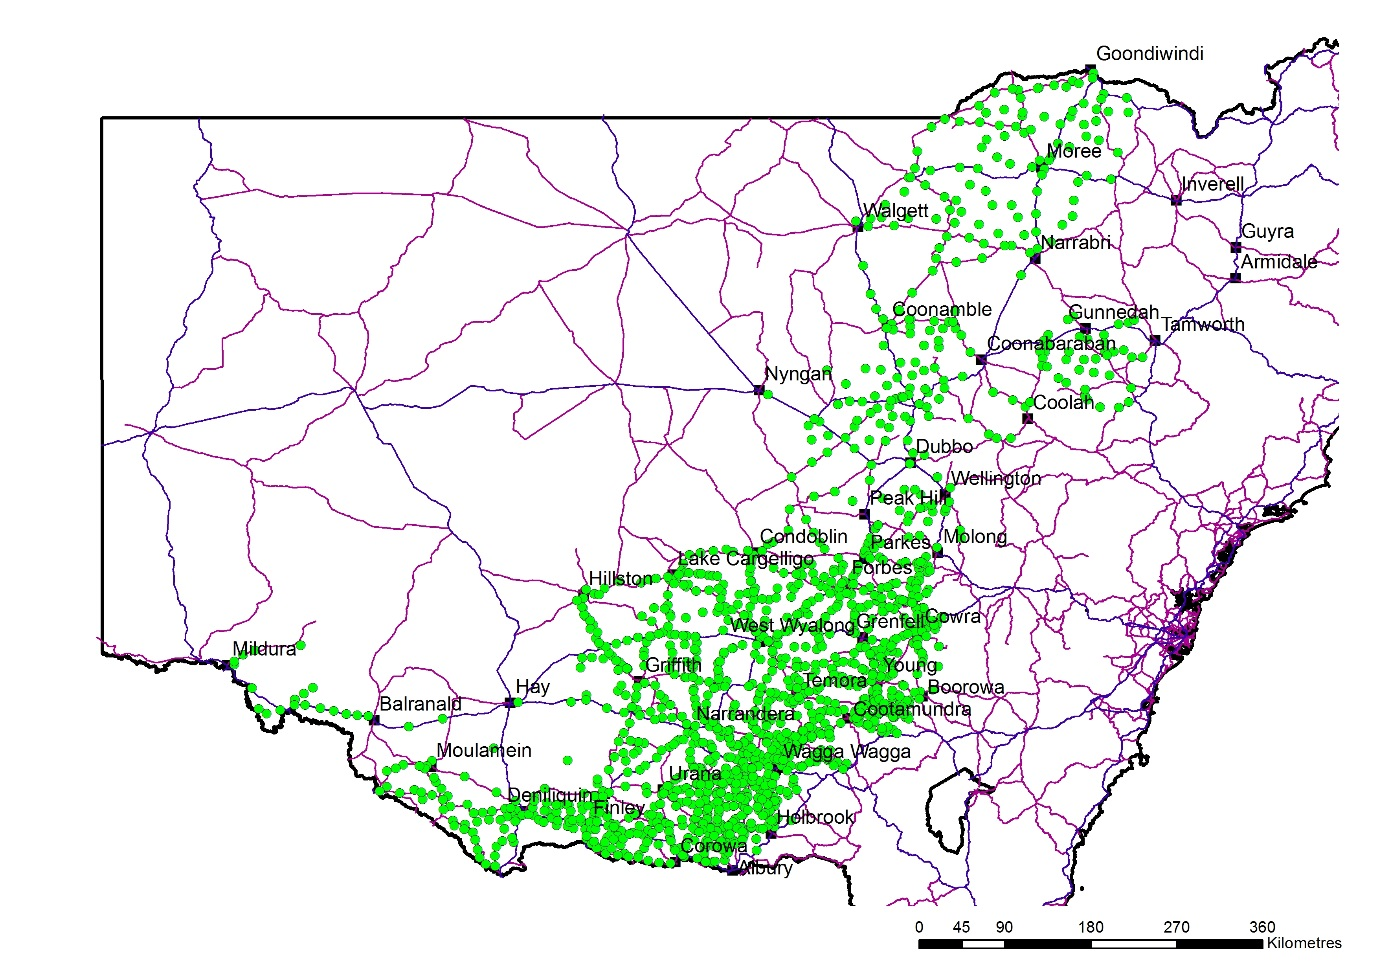 Figure 1 is a map of NSW that shows the locations visited for collection of samples during surveys (2007-2017)